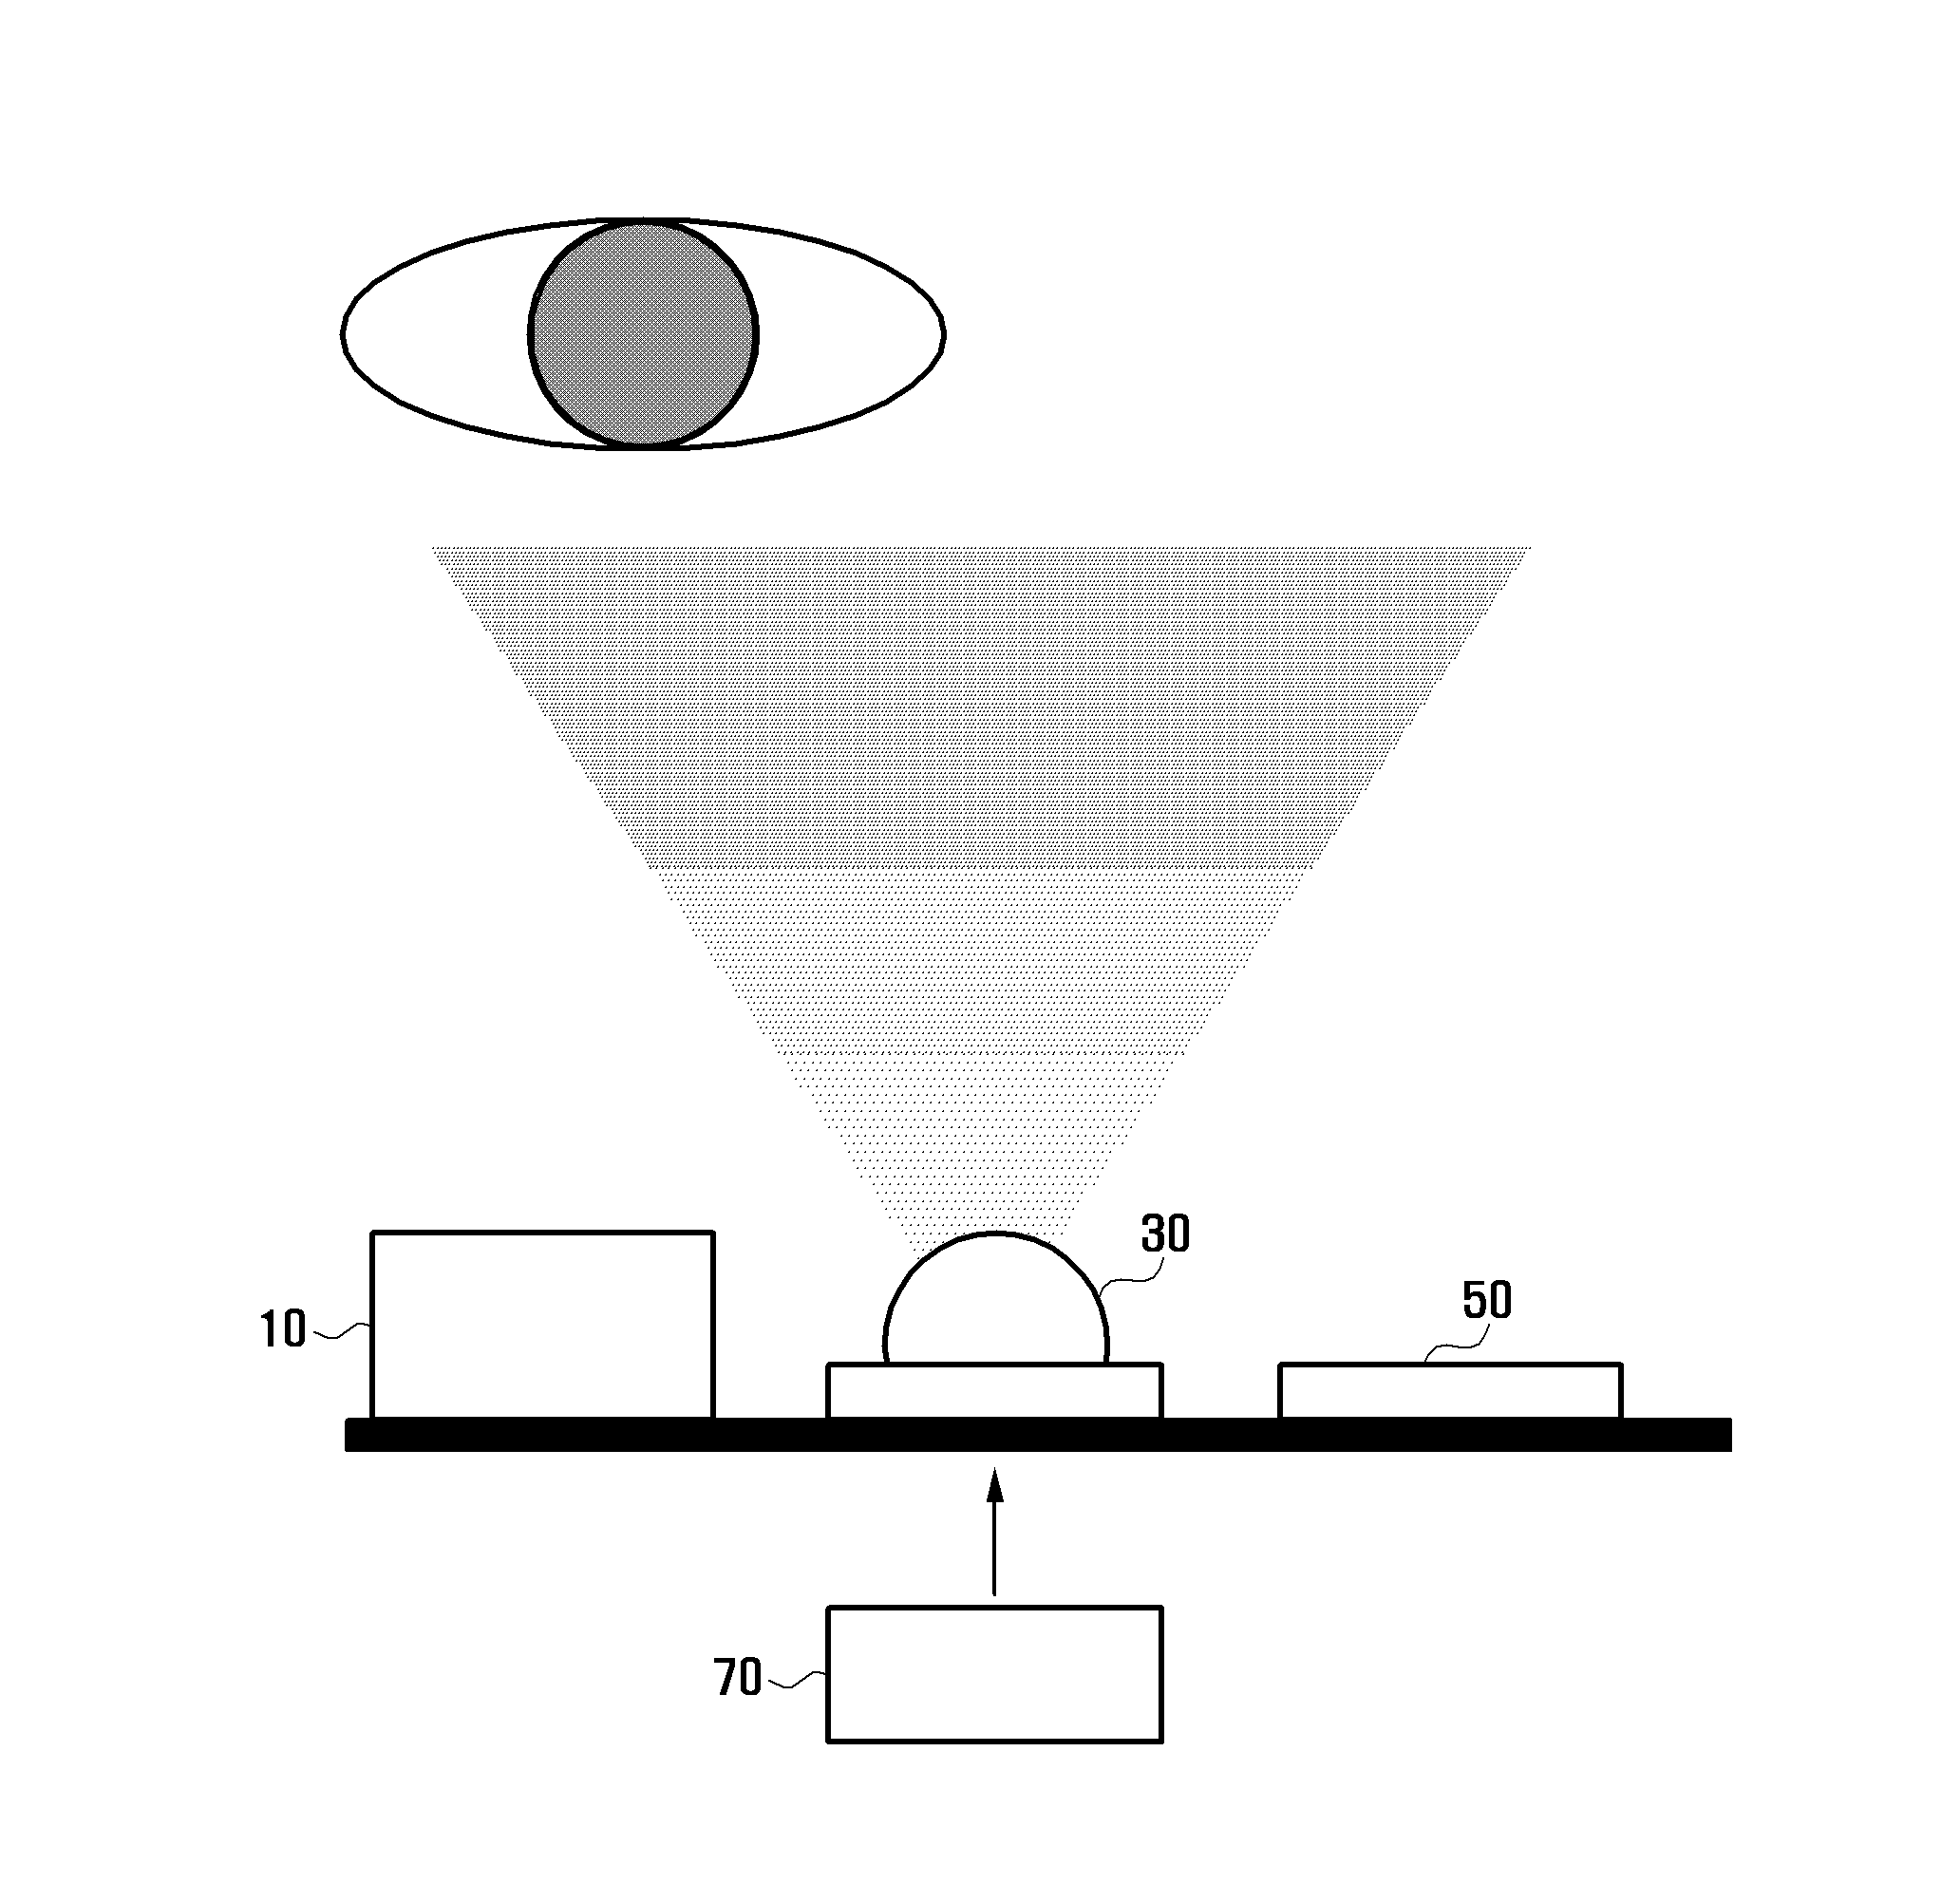 Terminal and method for iris scanning and proximity sensing